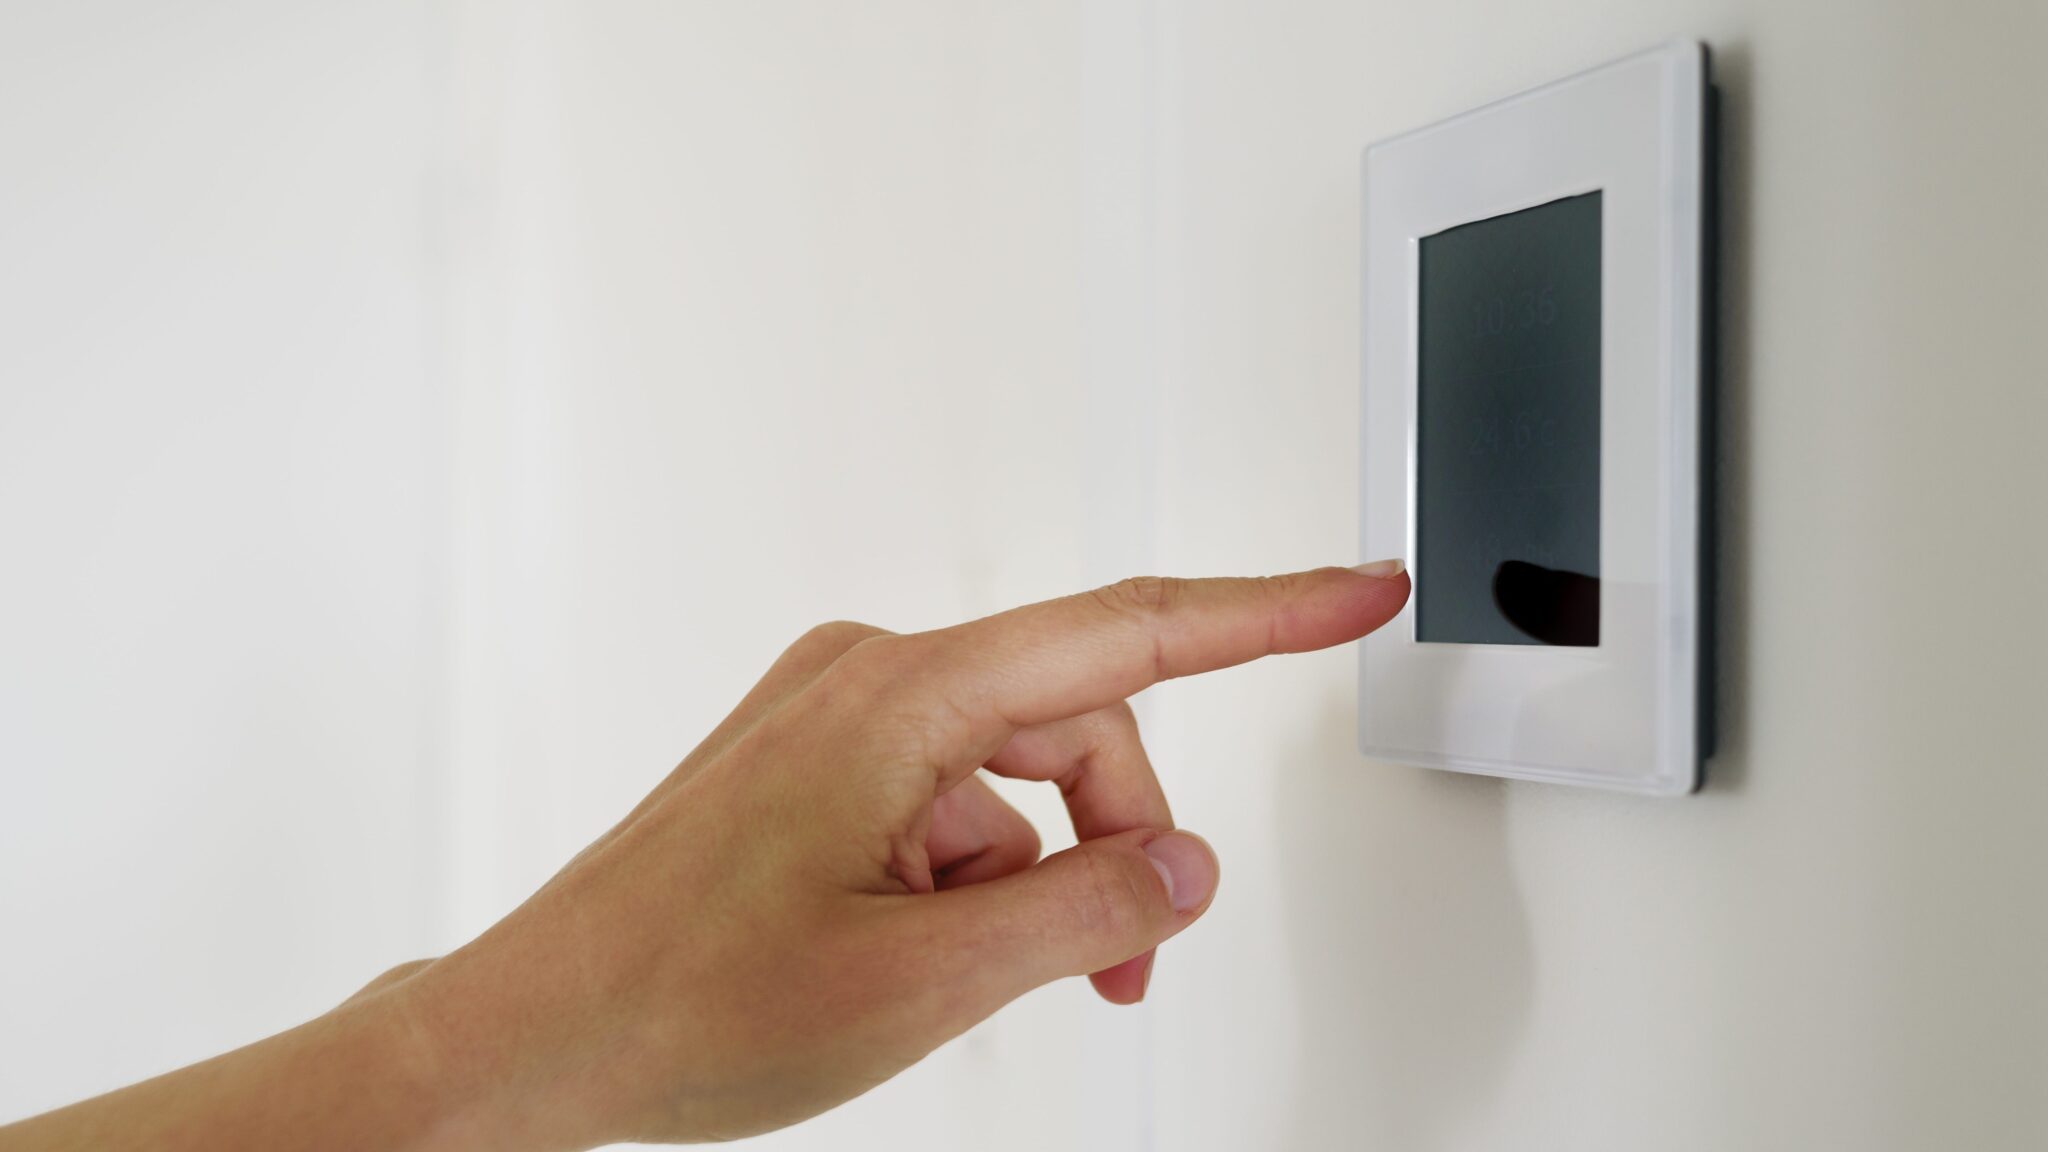 Hand using controller panel with display at home. Smart house system